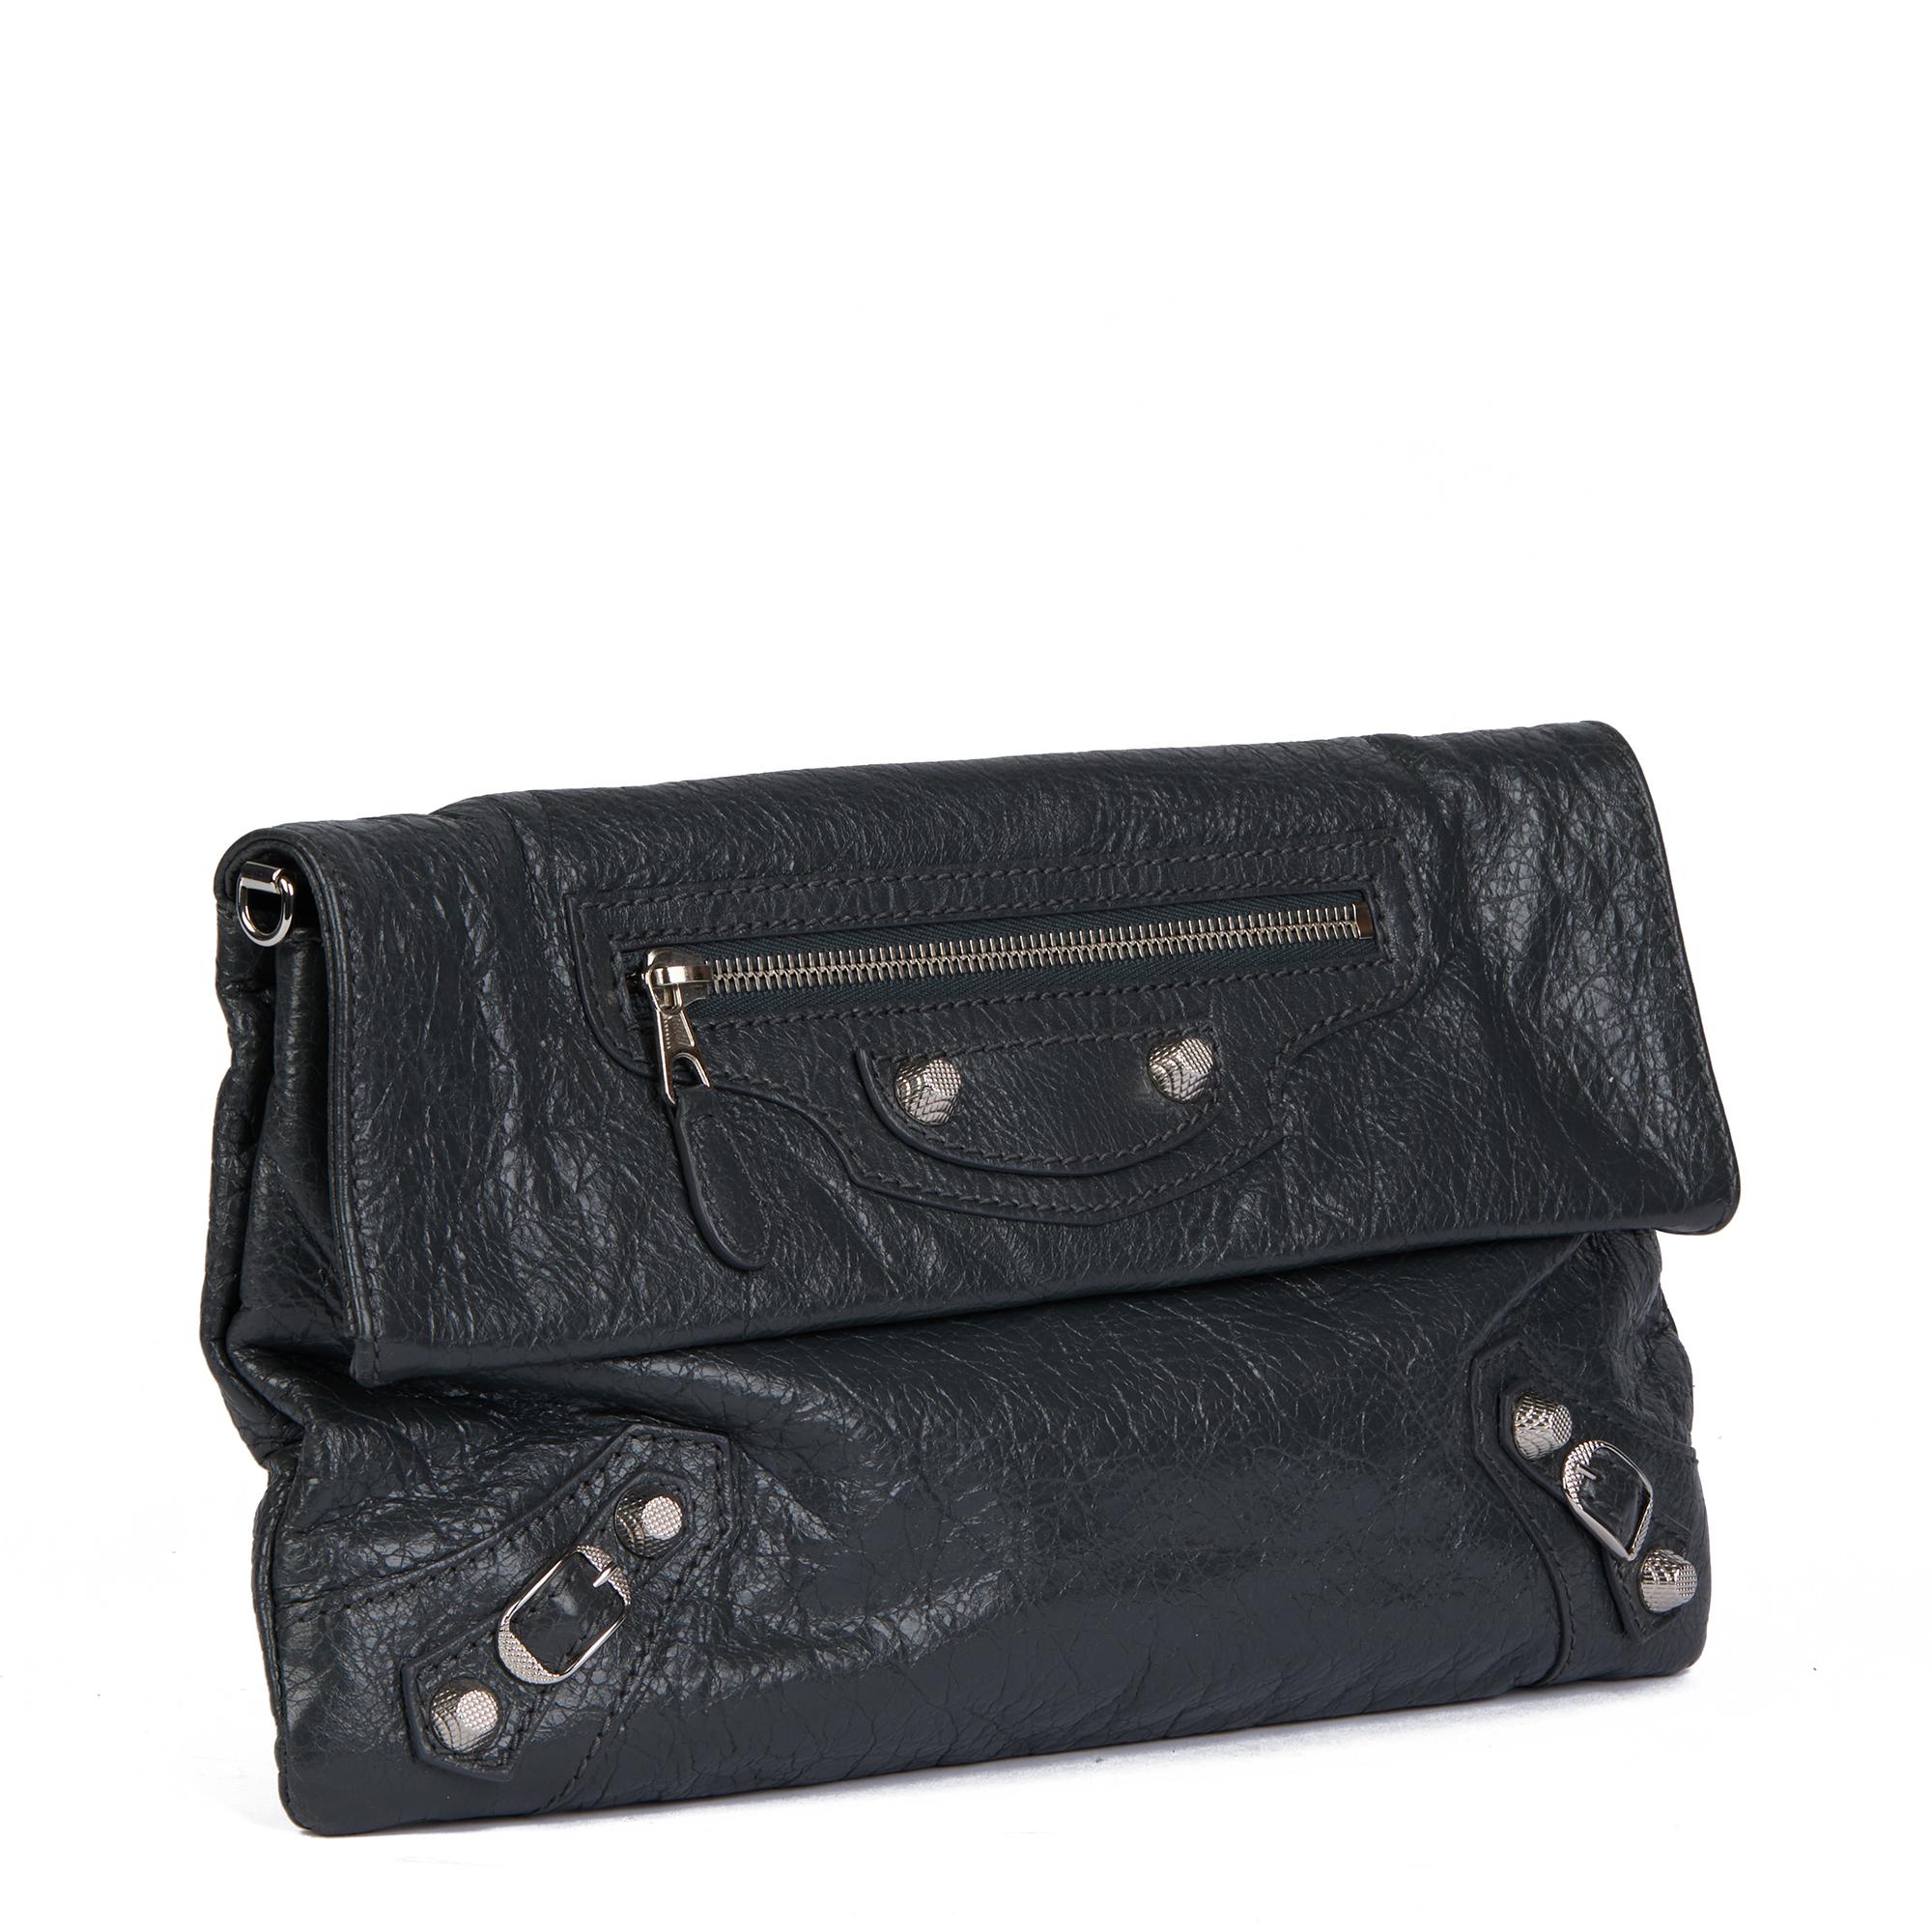 BALENCIAGA
Dark Grey Agneau Lambskin Envelope Shoulder Clutch

Xupes Reference: CB751
Serial Number: 327079-1110-F-525040
Age (Circa): 2010
Accompanied By: Balenciaga Dust Bag, Shoulder Strap, Mirror
Authenticity Details: Serial Stamp (Made in